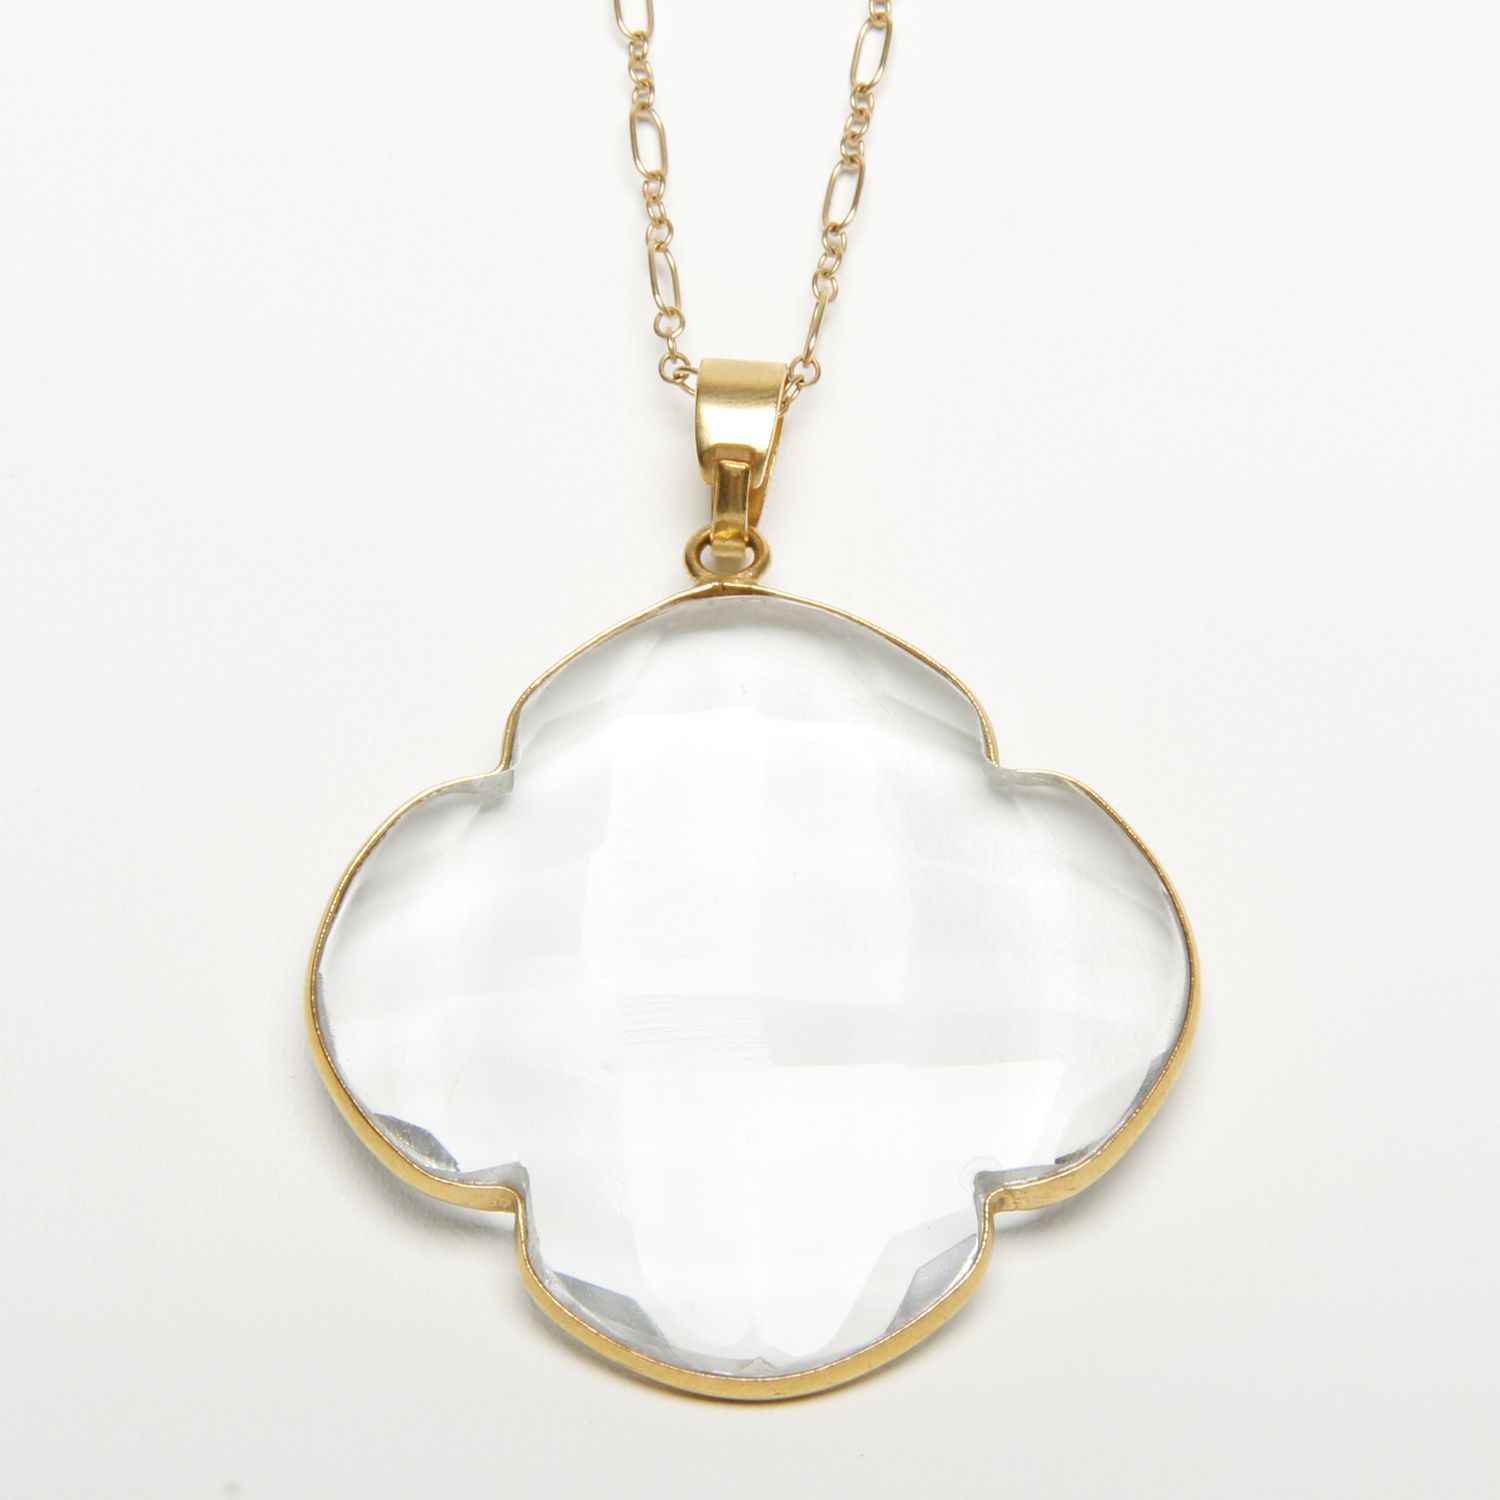 Valentine Rouge Jewellery: Clear Clover Necklace Product Image 2 of 2